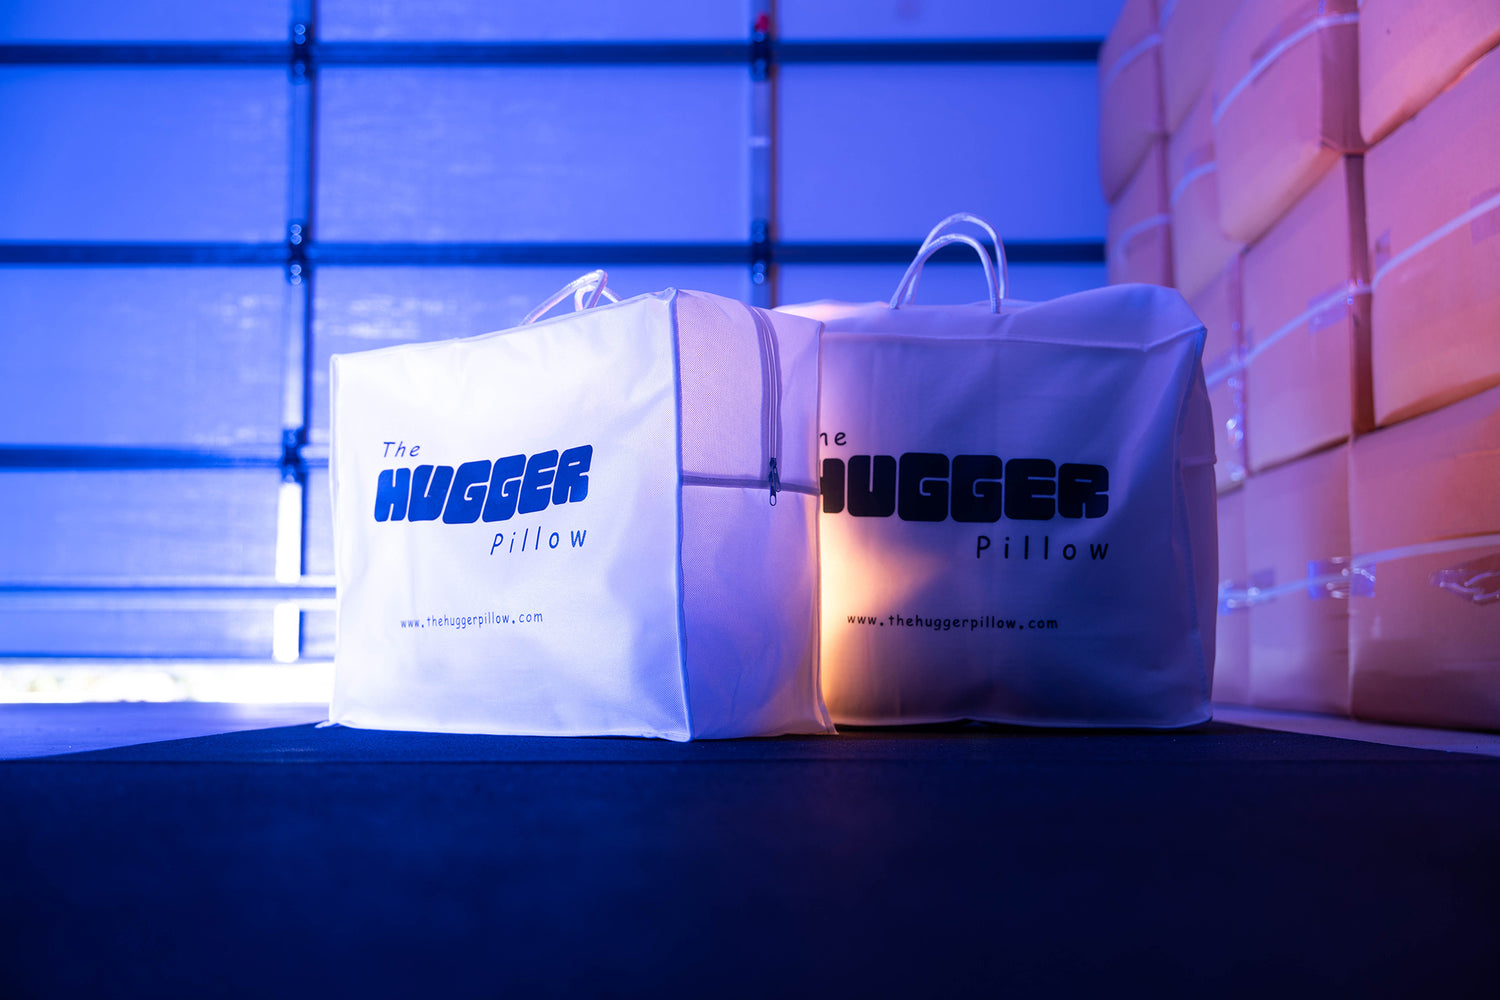 This is the hero cover image on the Shipping and Returns page, showing two Hugger Pillow packages in a warehouse or garage